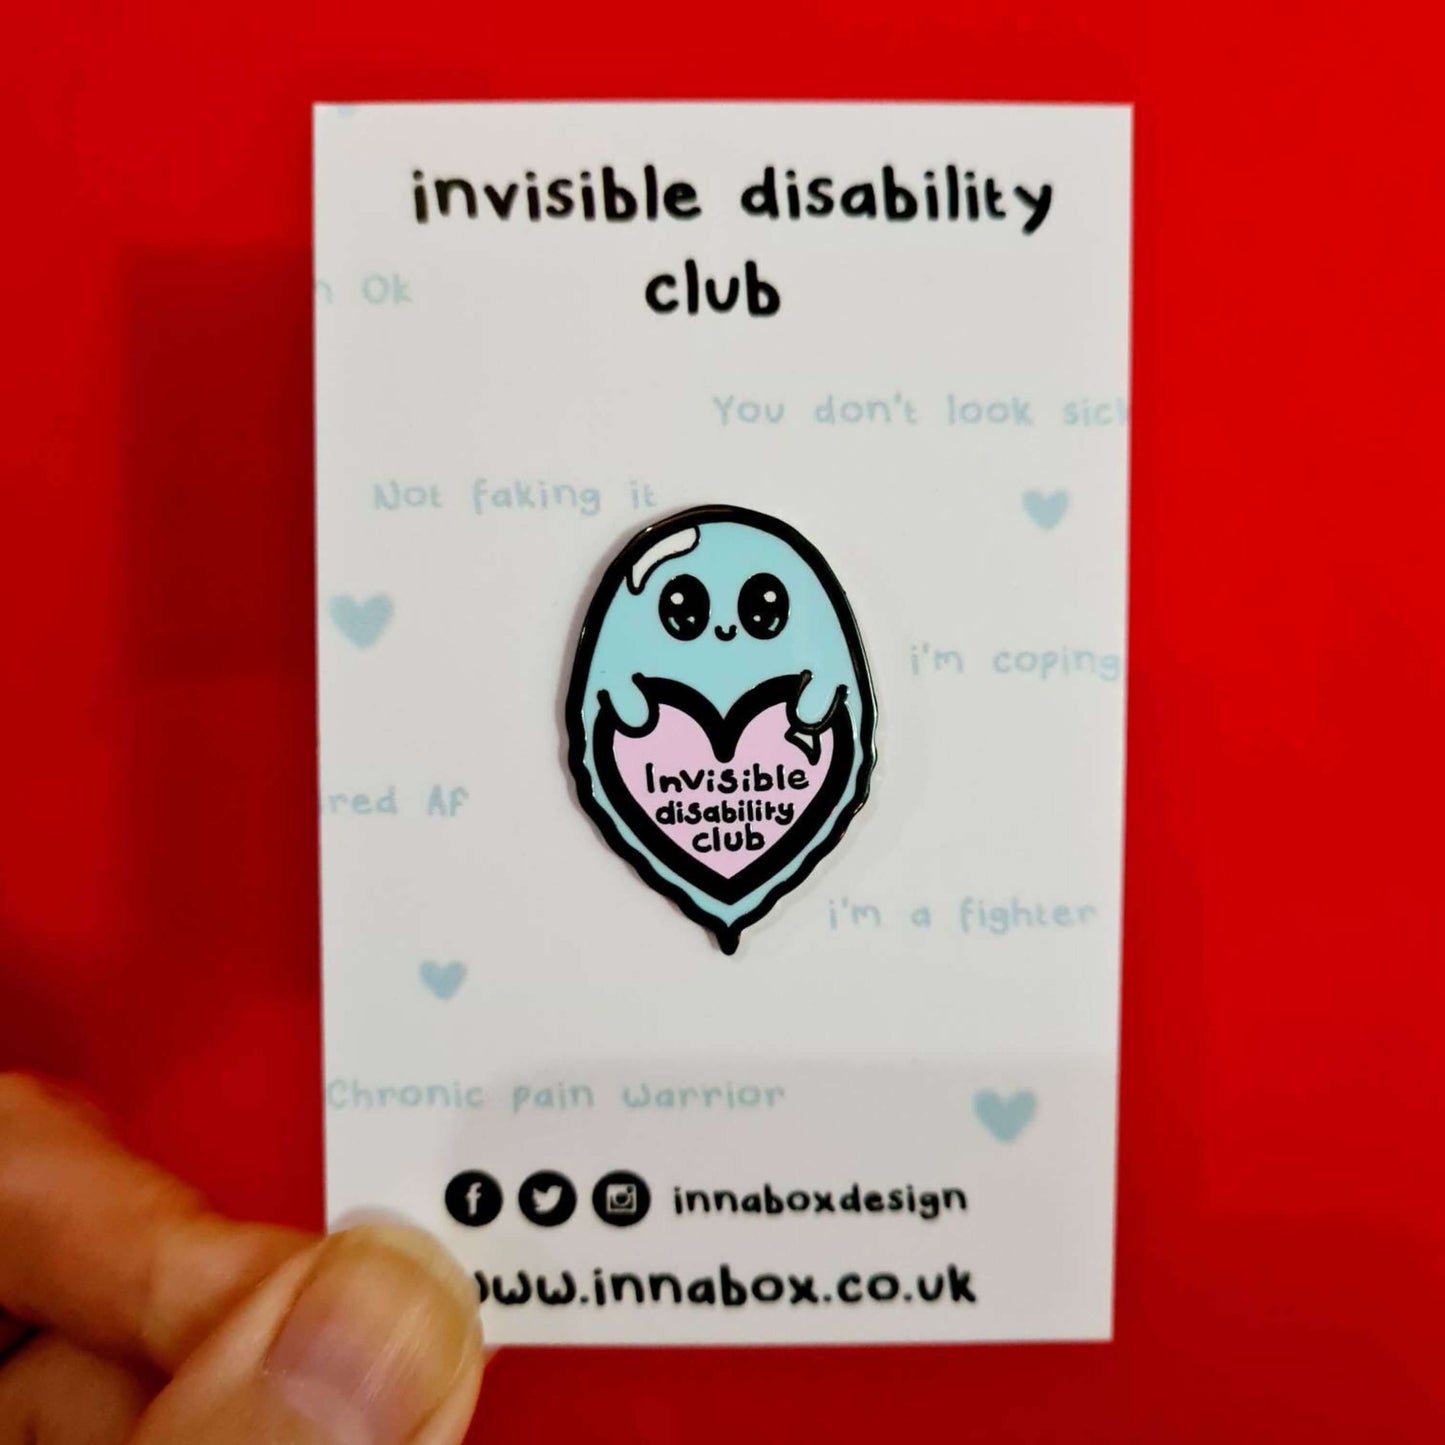 Invisible Disability Club Enamel Pin on white backing card with light blue quotes written on it in front of a red background. The enamel pin is of a cute smiling ghost holding a pink heart with text saying invisible disability club. The enamel pin is designed to raise awareness for hidden and chronic disabilities